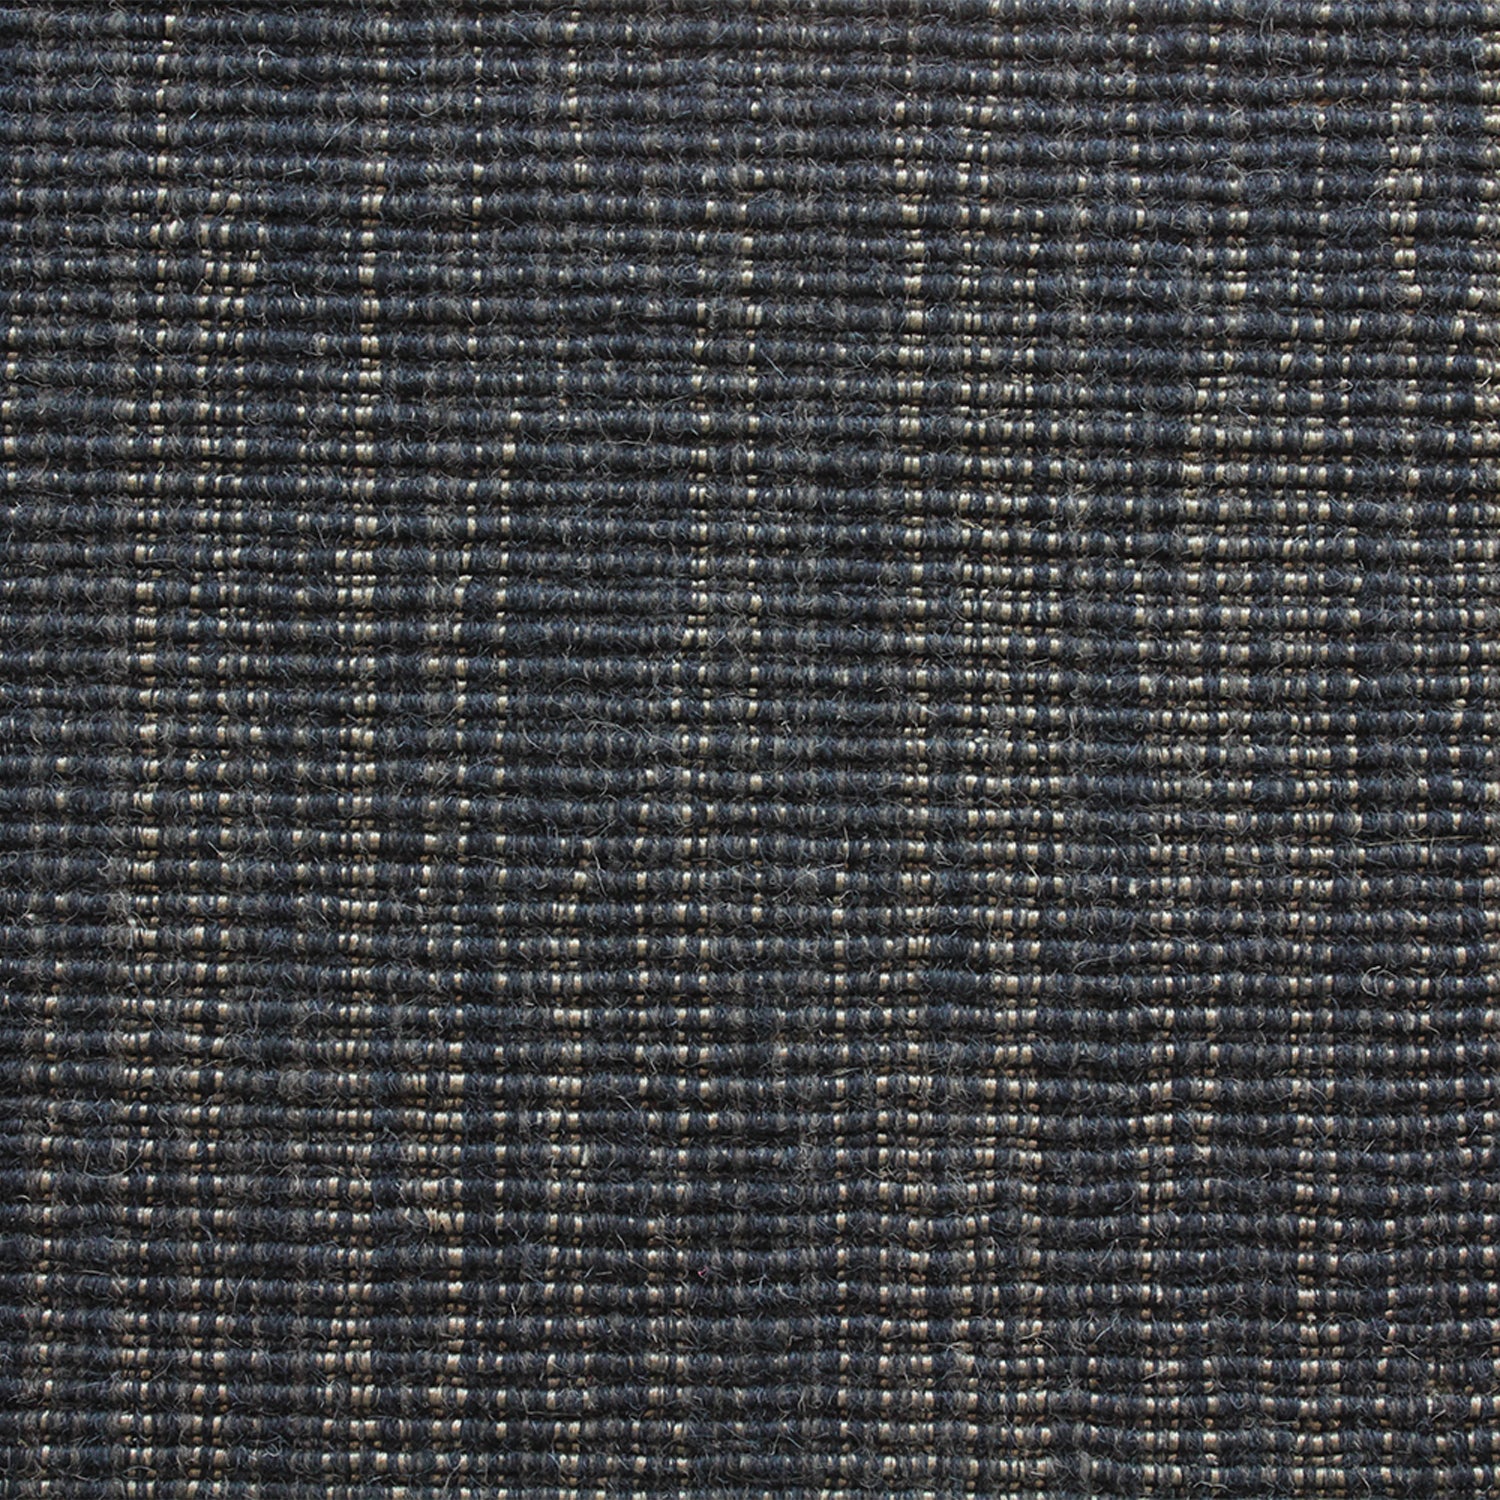 Wool-blend broadloom carpet swatch in a ribbed weave in mottled navy and tan.